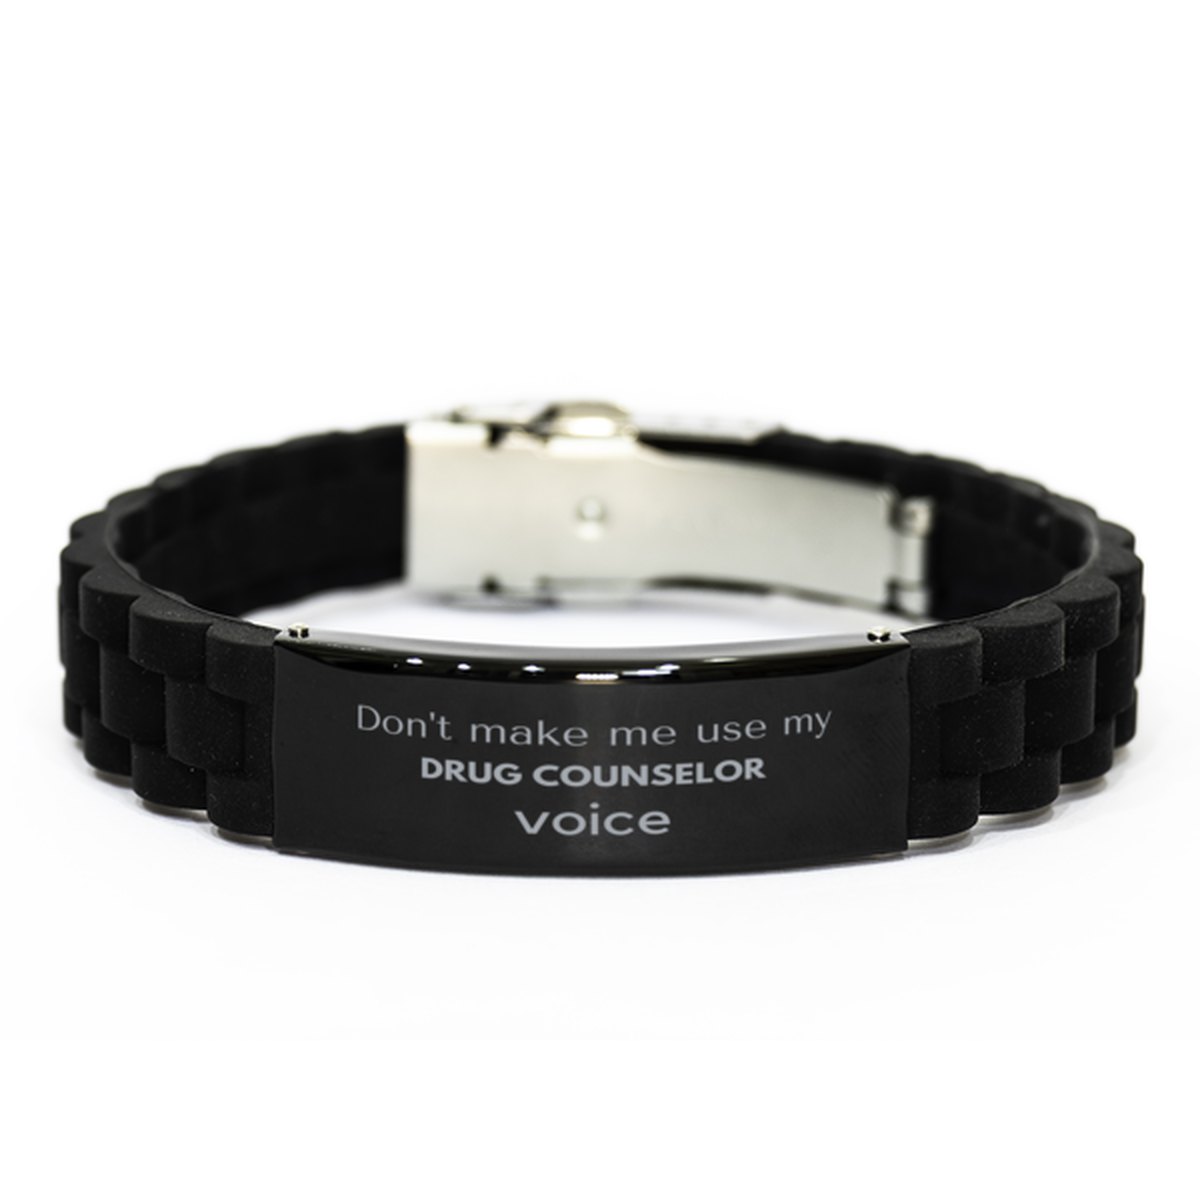 Don't make me use my Drug Counselor voice, Sarcasm Drug Counselor Gifts, Christmas Drug Counselor Black Glidelock Clasp Bracelet Birthday Unique Gifts For Drug Counselor Coworkers, Men, Women, Colleague, Friends